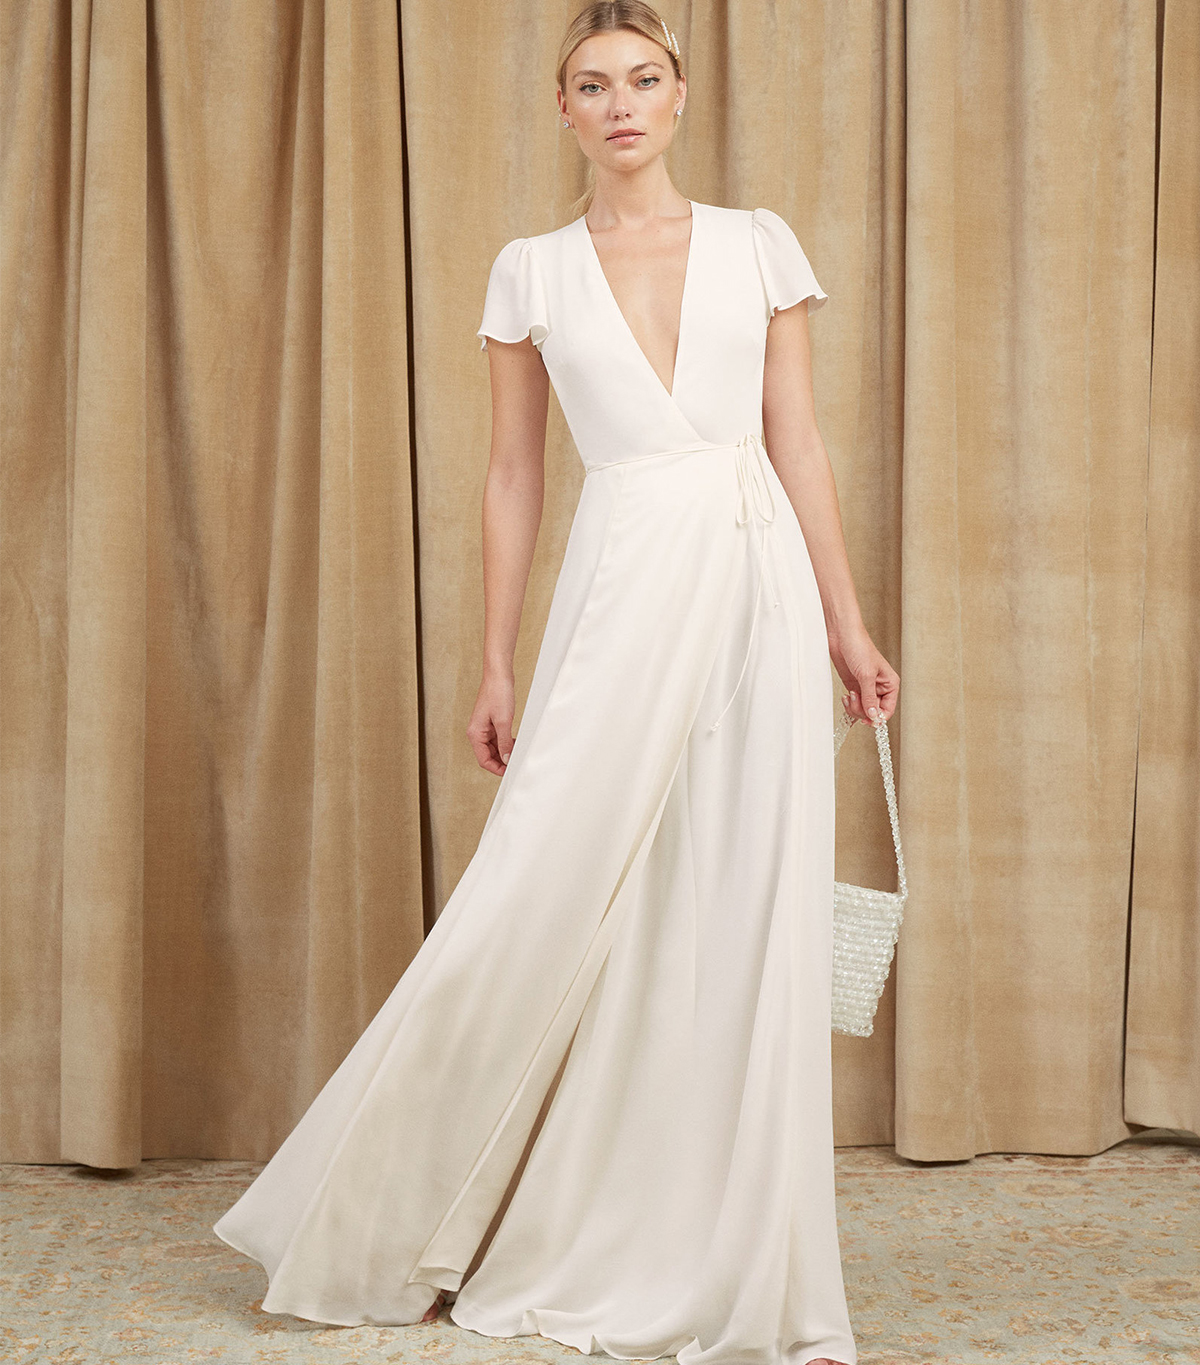 Top Simple Elegant Wedding Dresses For The Beach in the world The ultimate guide 